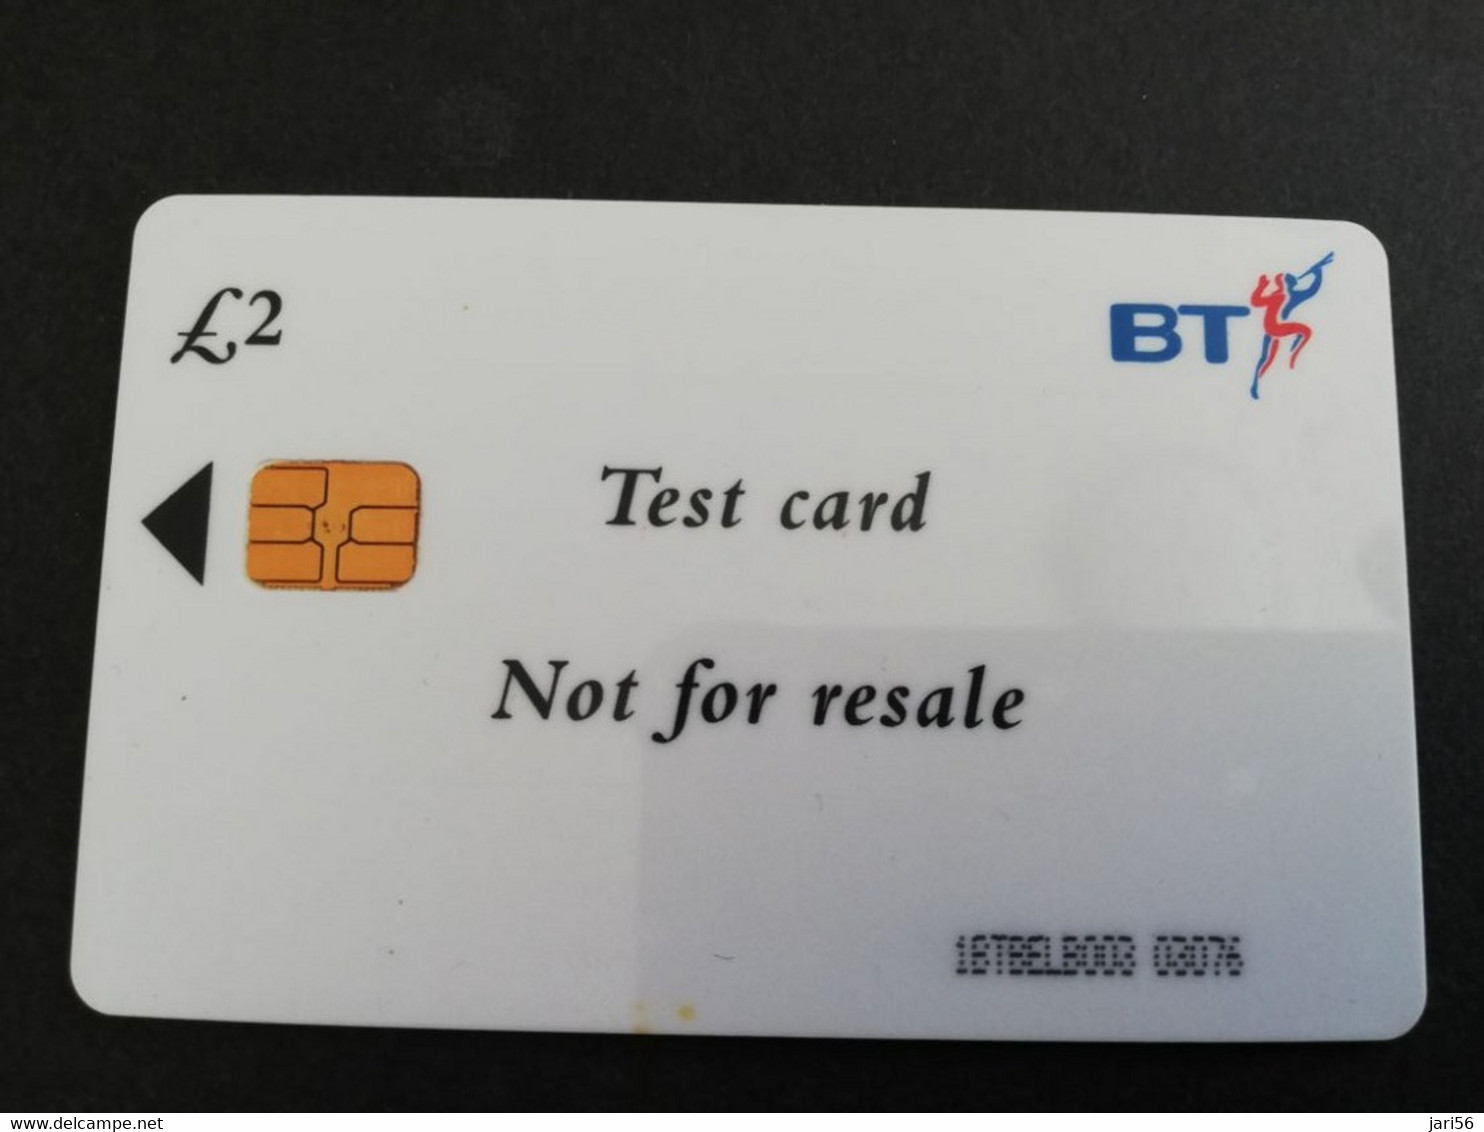 GREAT BRETAGNE  CHIPCARDS / TEST  BT  CARD 2 POUND   PERFECT  CONDITION      **4795** - BT General